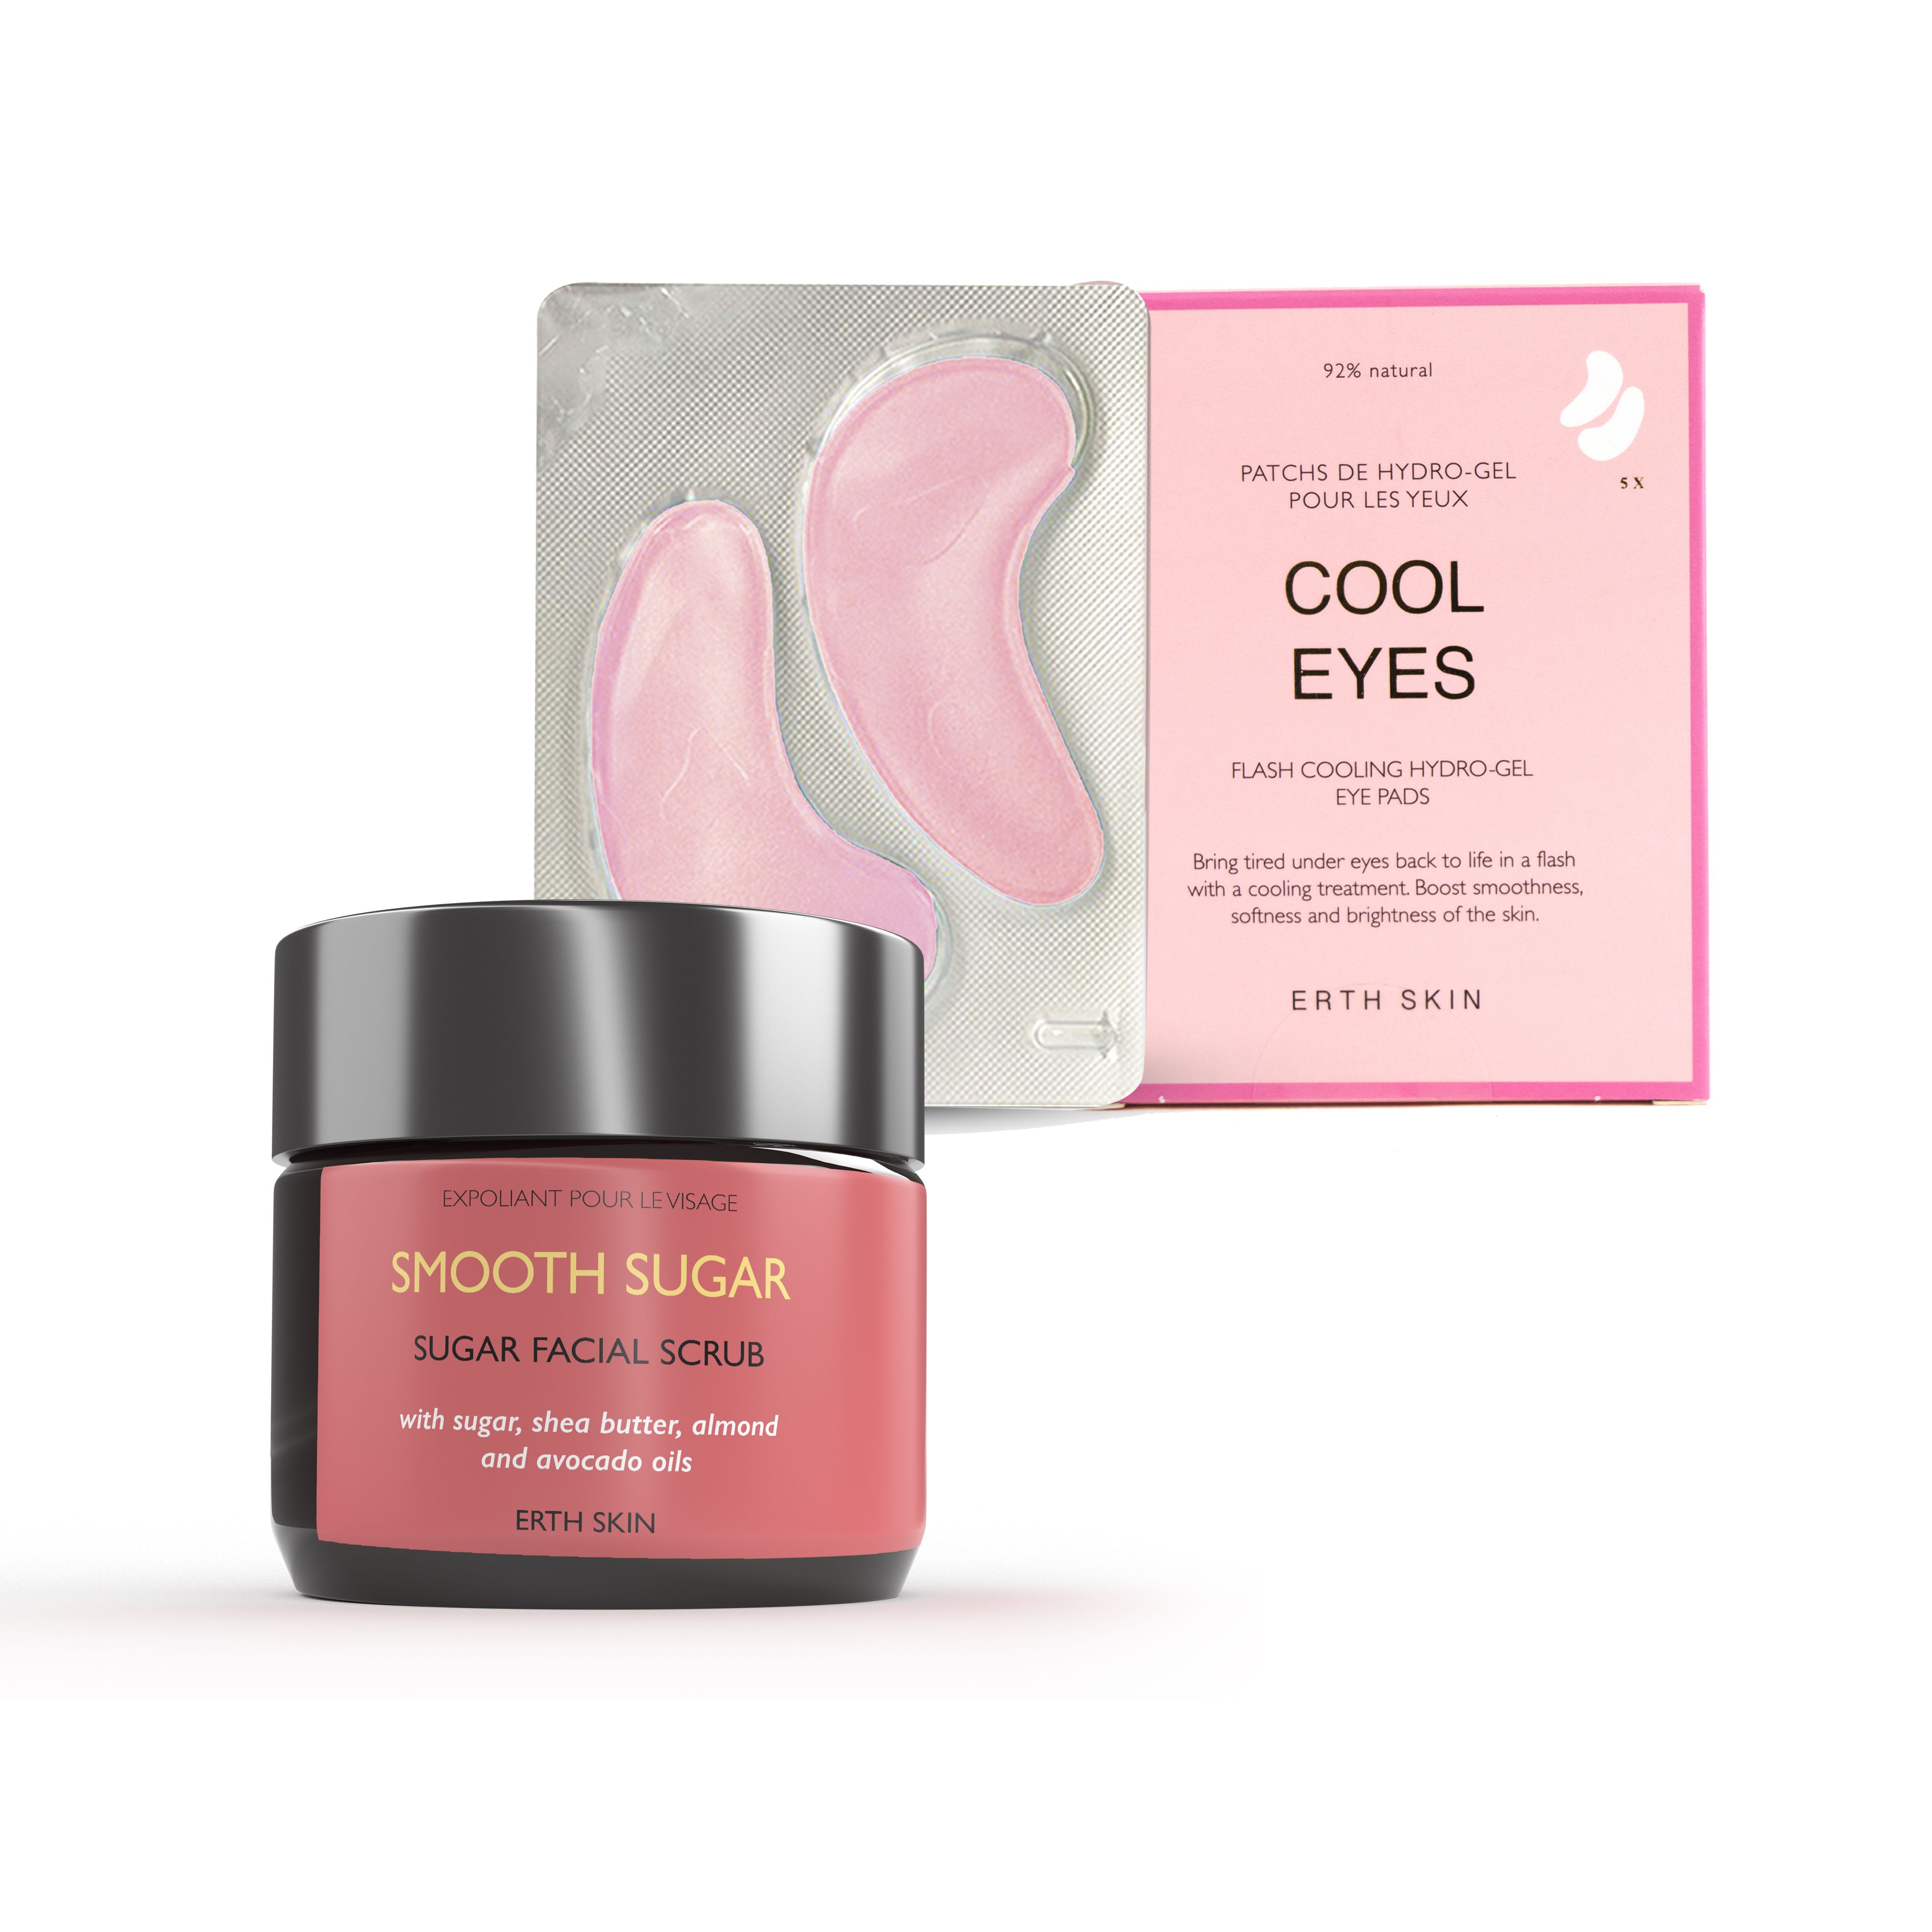 Cool Eyes Flash Cooling Hydro-gel eye pads are treatment masks that aim to bring tired eyes back to life and help reduce the appearance of puffiness and fatigue. Infused with firming complex that smoothens the look of the skin and aims to make the skin feel firmer and look smoother. Infused with Acai berry extract and raspberry extract that feeds the skin with nourishing antioxidants and vitamins.Smooth Sugar is a natural face exfoliator that aims to polish dead skin cells and make the skin appear smoother, more even and nourished. Use as an exfoliating cleanser when you add water. Infused with smoothing sweet sugar, super soothing and moisturising shea butter and moisture locking almond and avocado oils.
98% natural ingredients
Sweet sugar extract
Adds soft bouncy feeling to the skin
Contain natural anti-pollution complex
Boosts skin’s smoothness and radiance
Locks in moisture with jojoba and avocado oil
Nutrient rich formula with protective antioxidants
Promotes natural softness of the skin
Usage: Take a generous scoop of the product to your finger-tips and apply to skin, massage with circular motions to the skin avoiding eyes, add water and continue massaging and see how the scrub transforms to milky cleanser. Wash away with water. For gentler exfoliator take a small dollop of the scrub to your palm add few drops of warm water and mix. The exfoliator becomes milky and smooth, apply to your face in circular motions and wash with warm water.